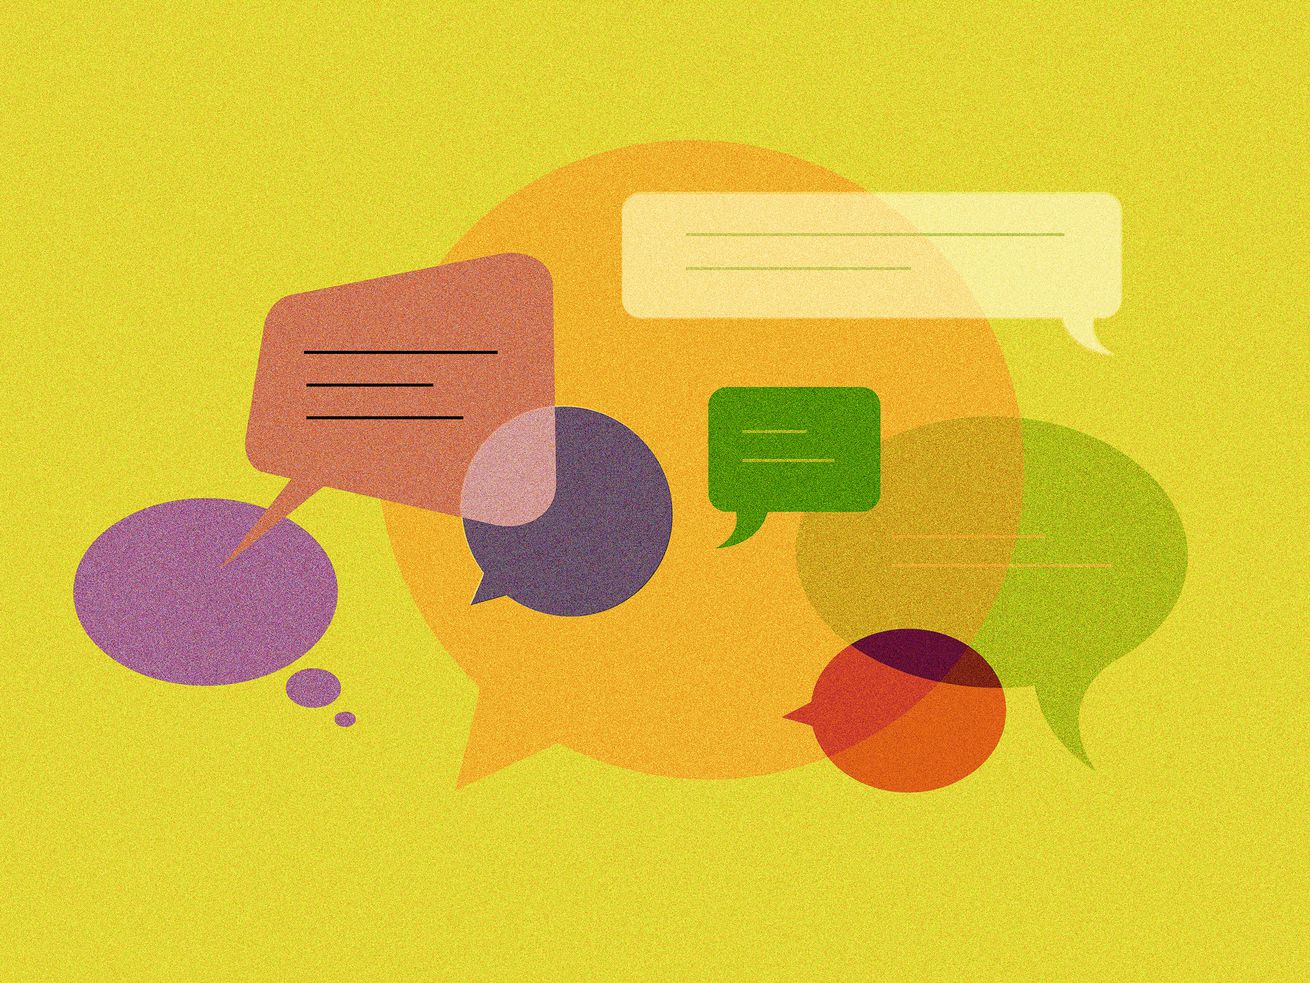 Illustration of colorful speech bubbles overlapping against a yellow background.